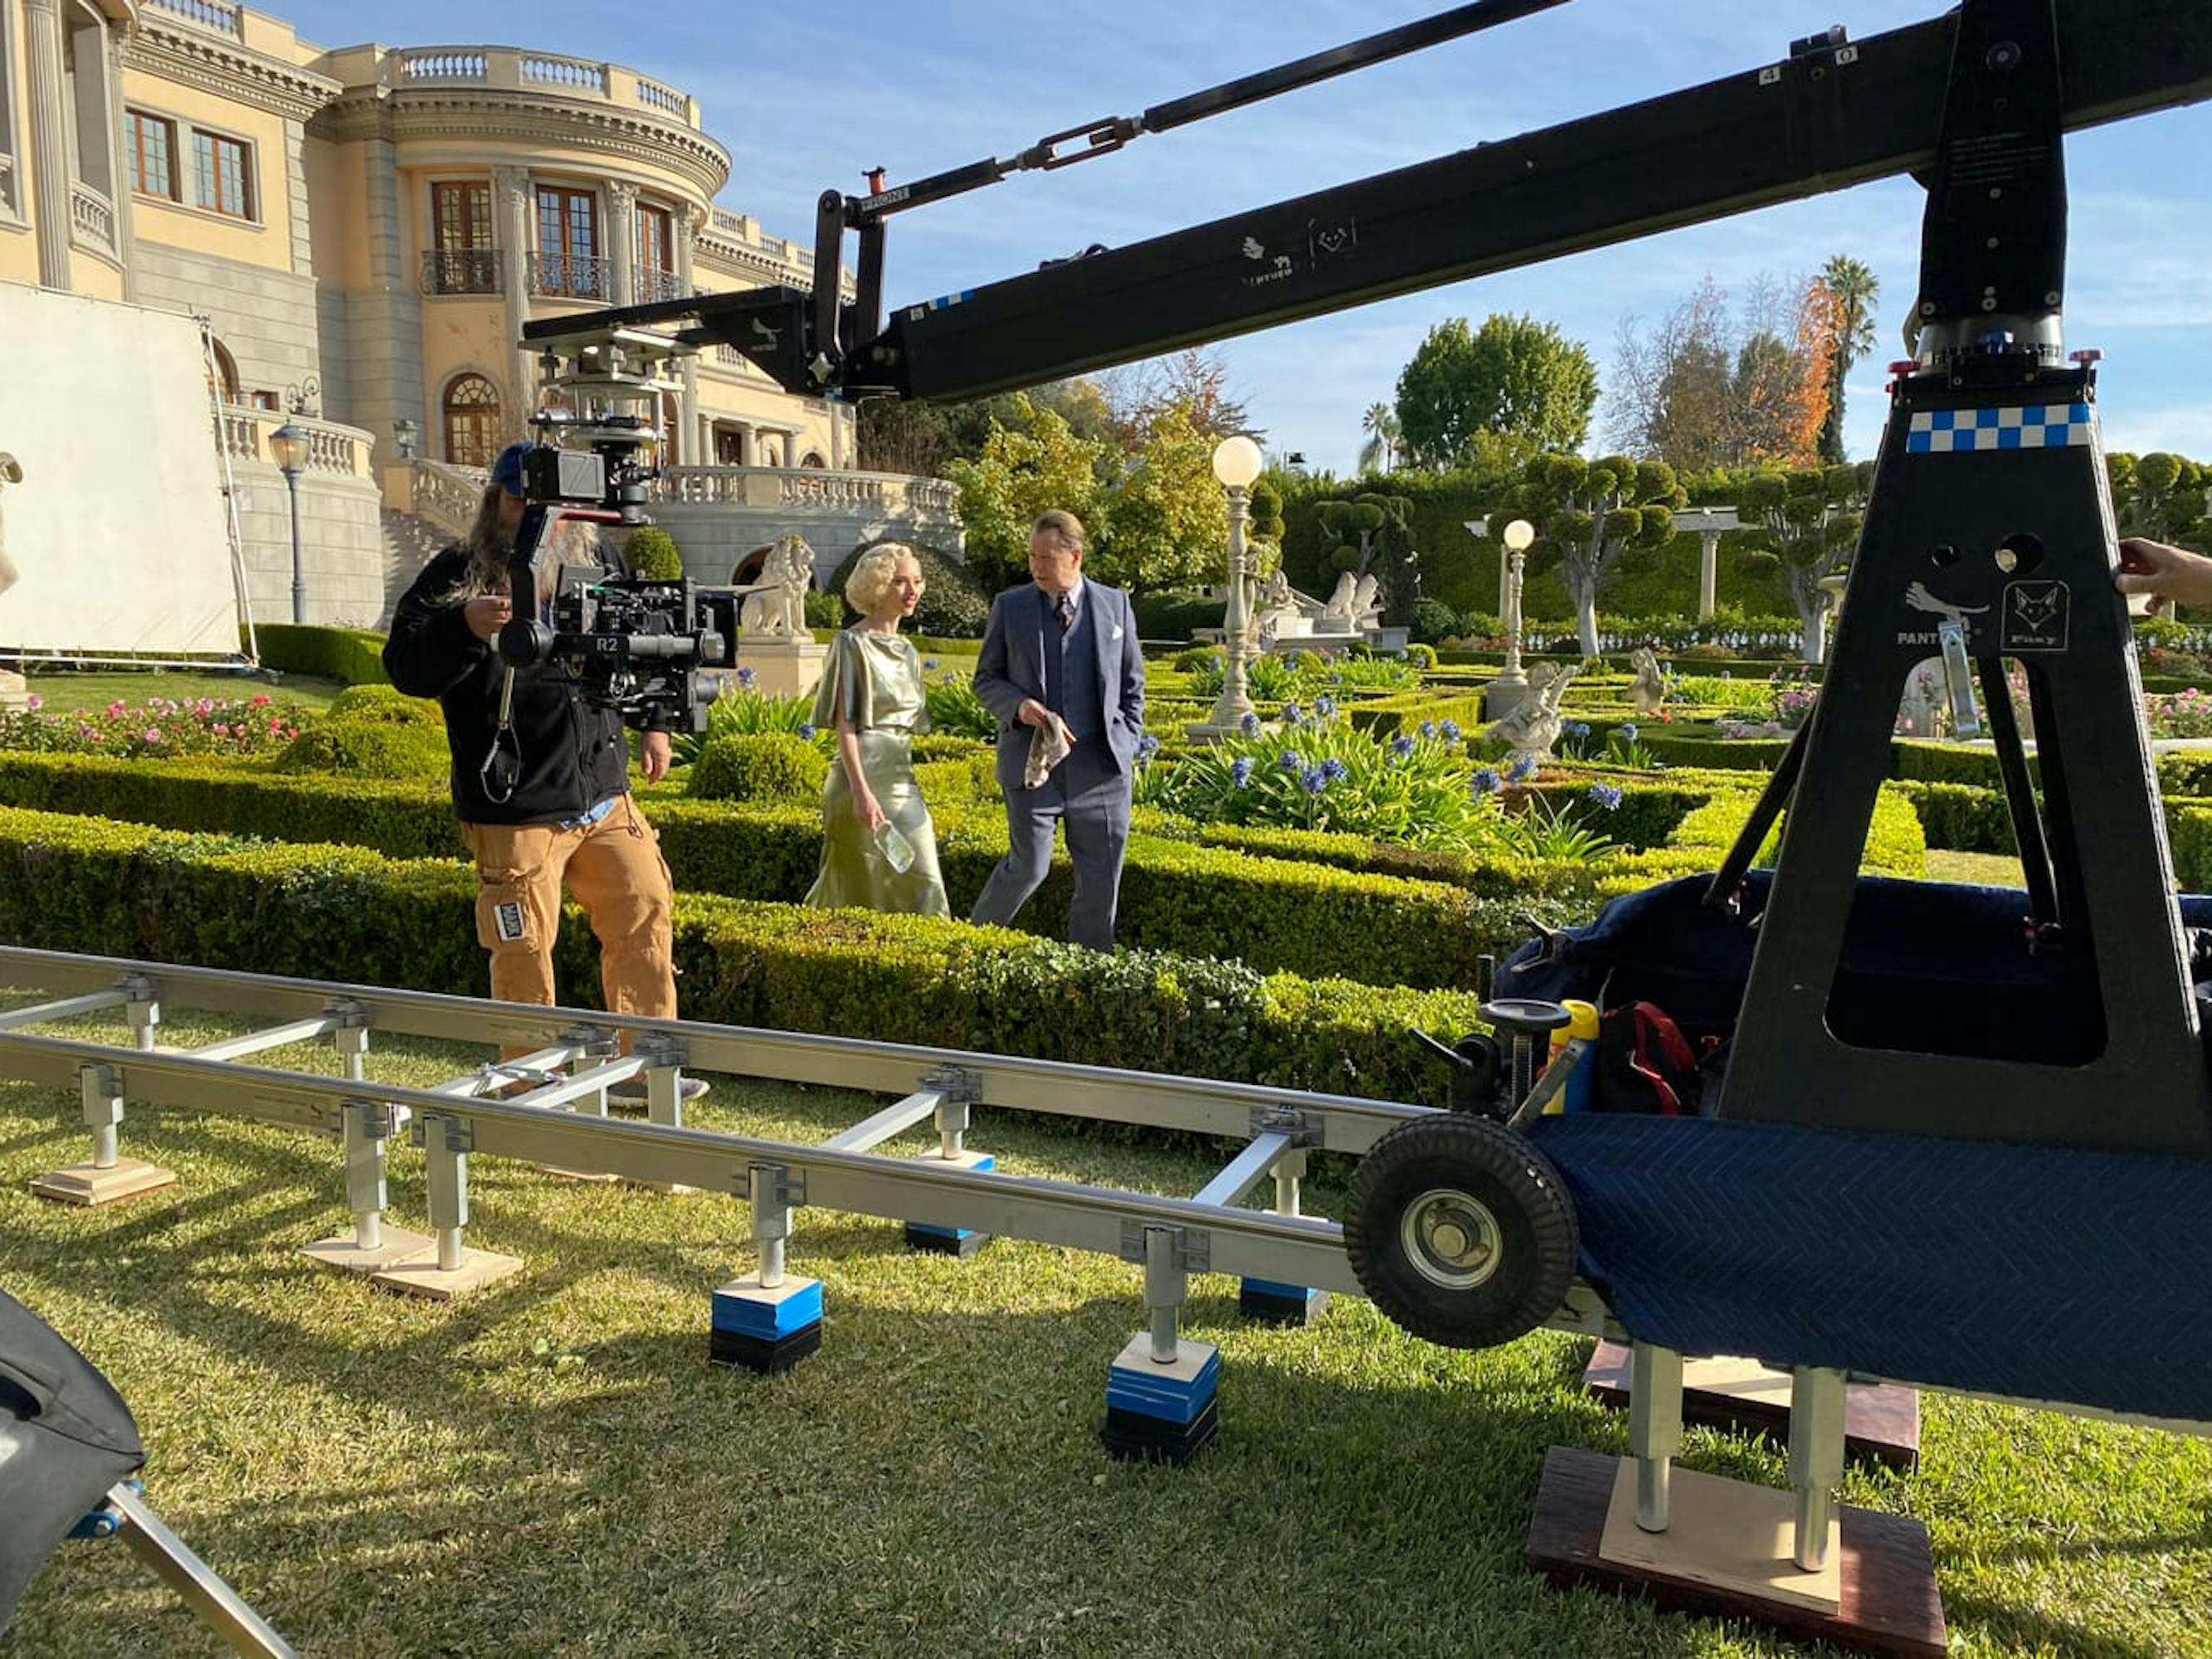 Seyfried and Oldman stroll through the bright green manicured garden that stands in for the Hearst Castle grounds.